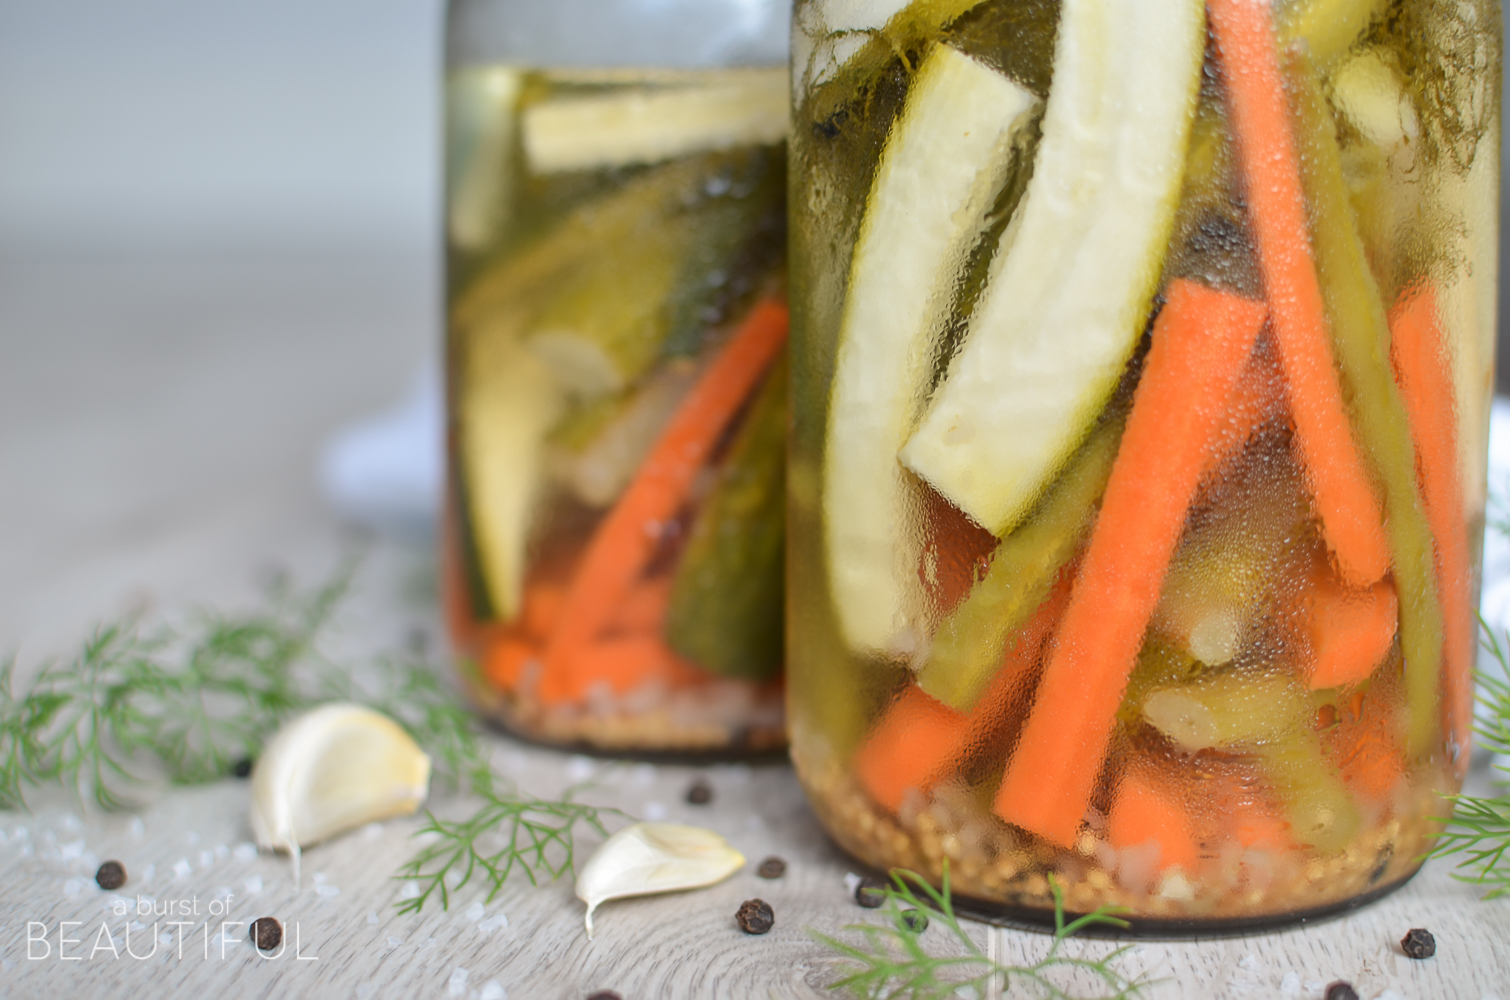 These easy refrigerator pickles and vegetables are a summer time favorite